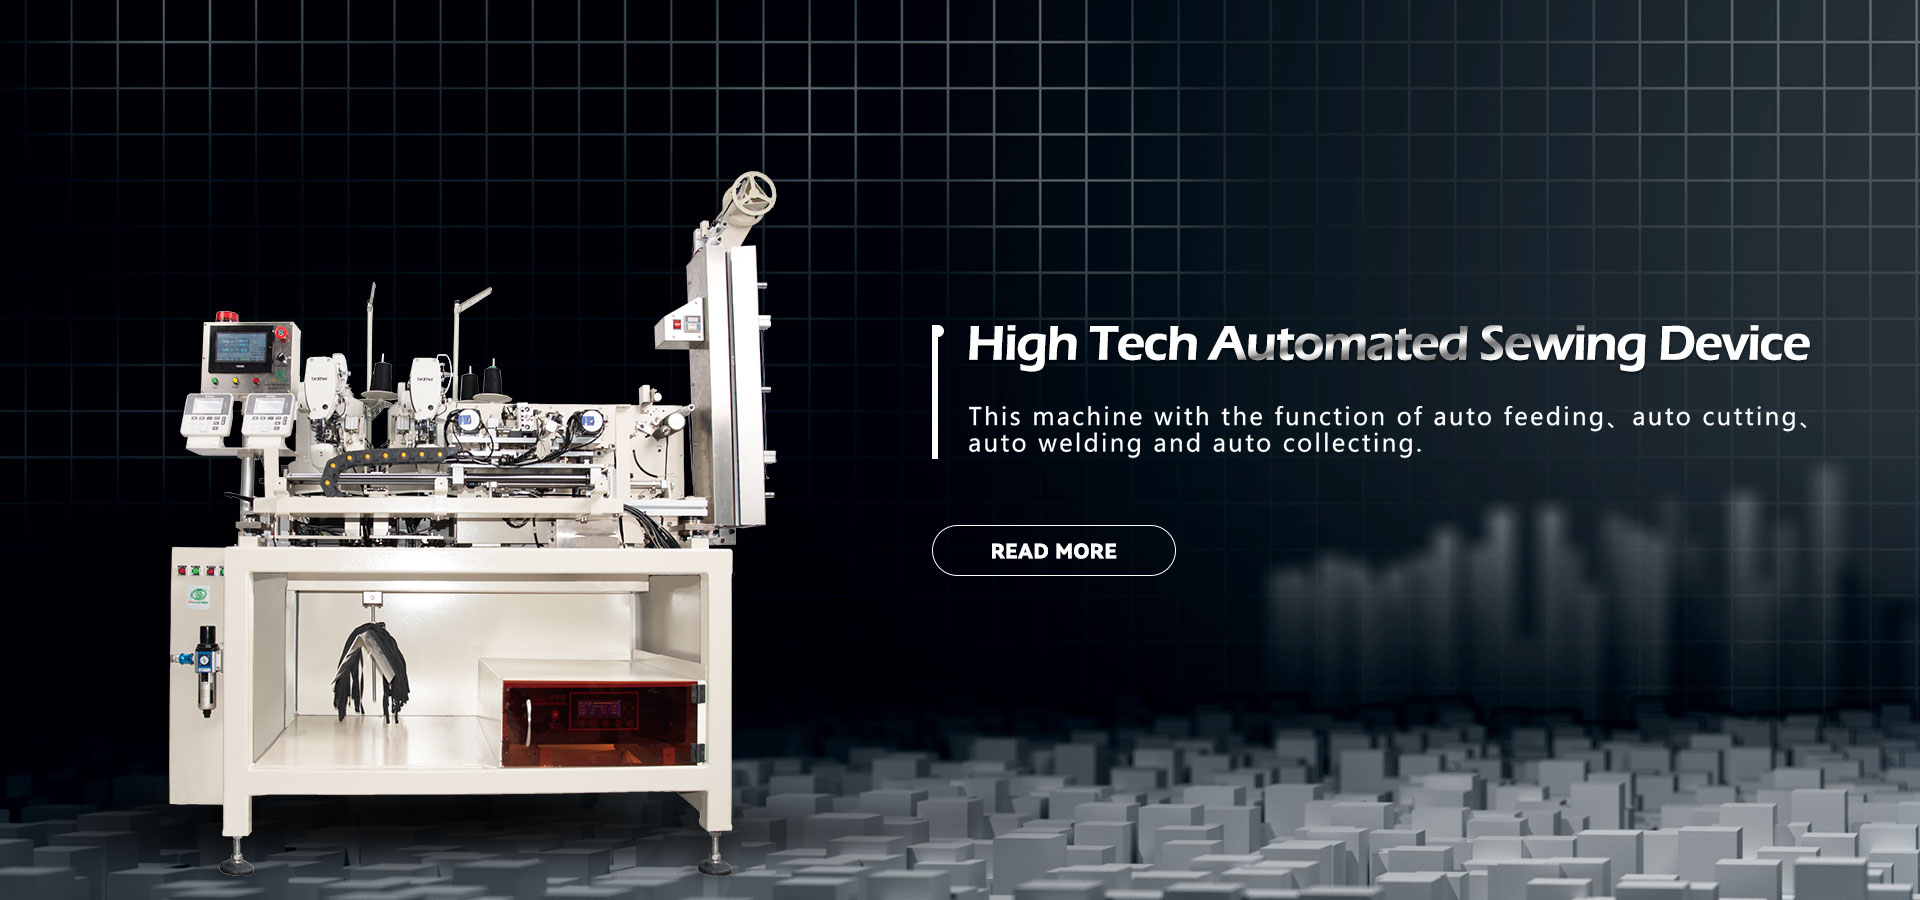 High Tech Automated Sewing Device Manufacturers